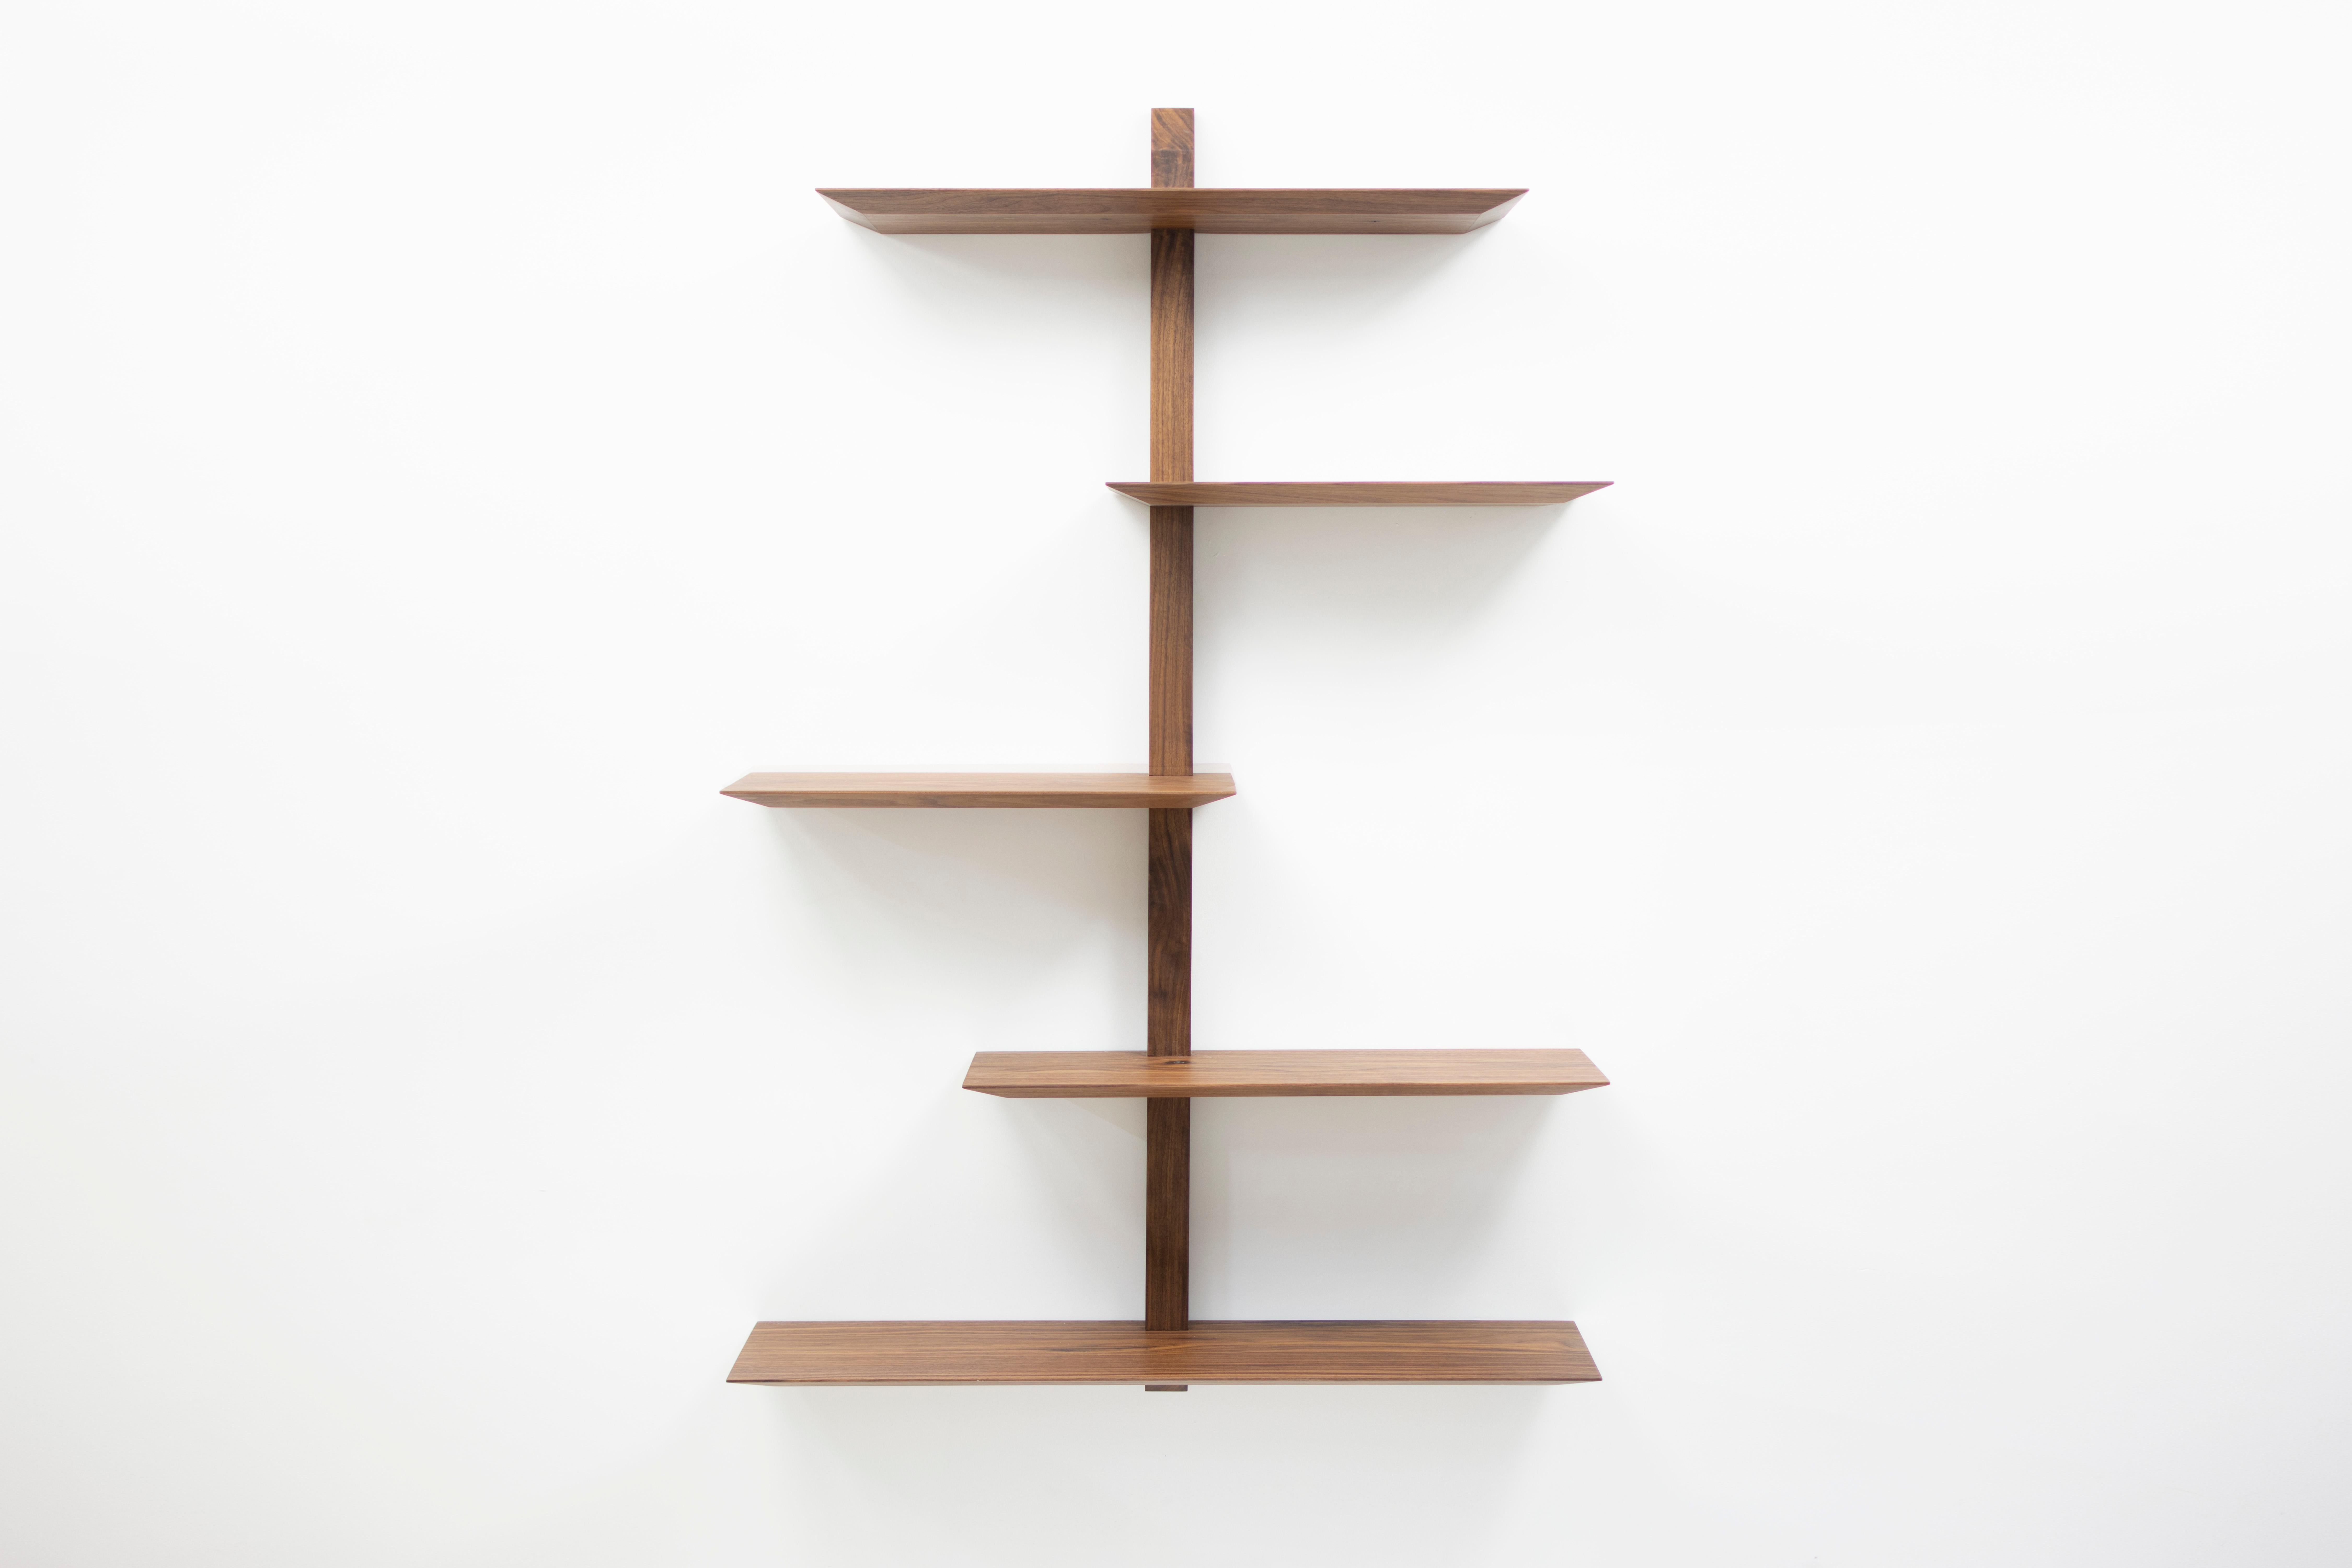 The Elemen shelving system features solid walnut shelving with a gem cut edge, joined with single vertical members to produce a striking and dynamic visual statement. The concealed wall bracket mounting system makes installation quick and painless,